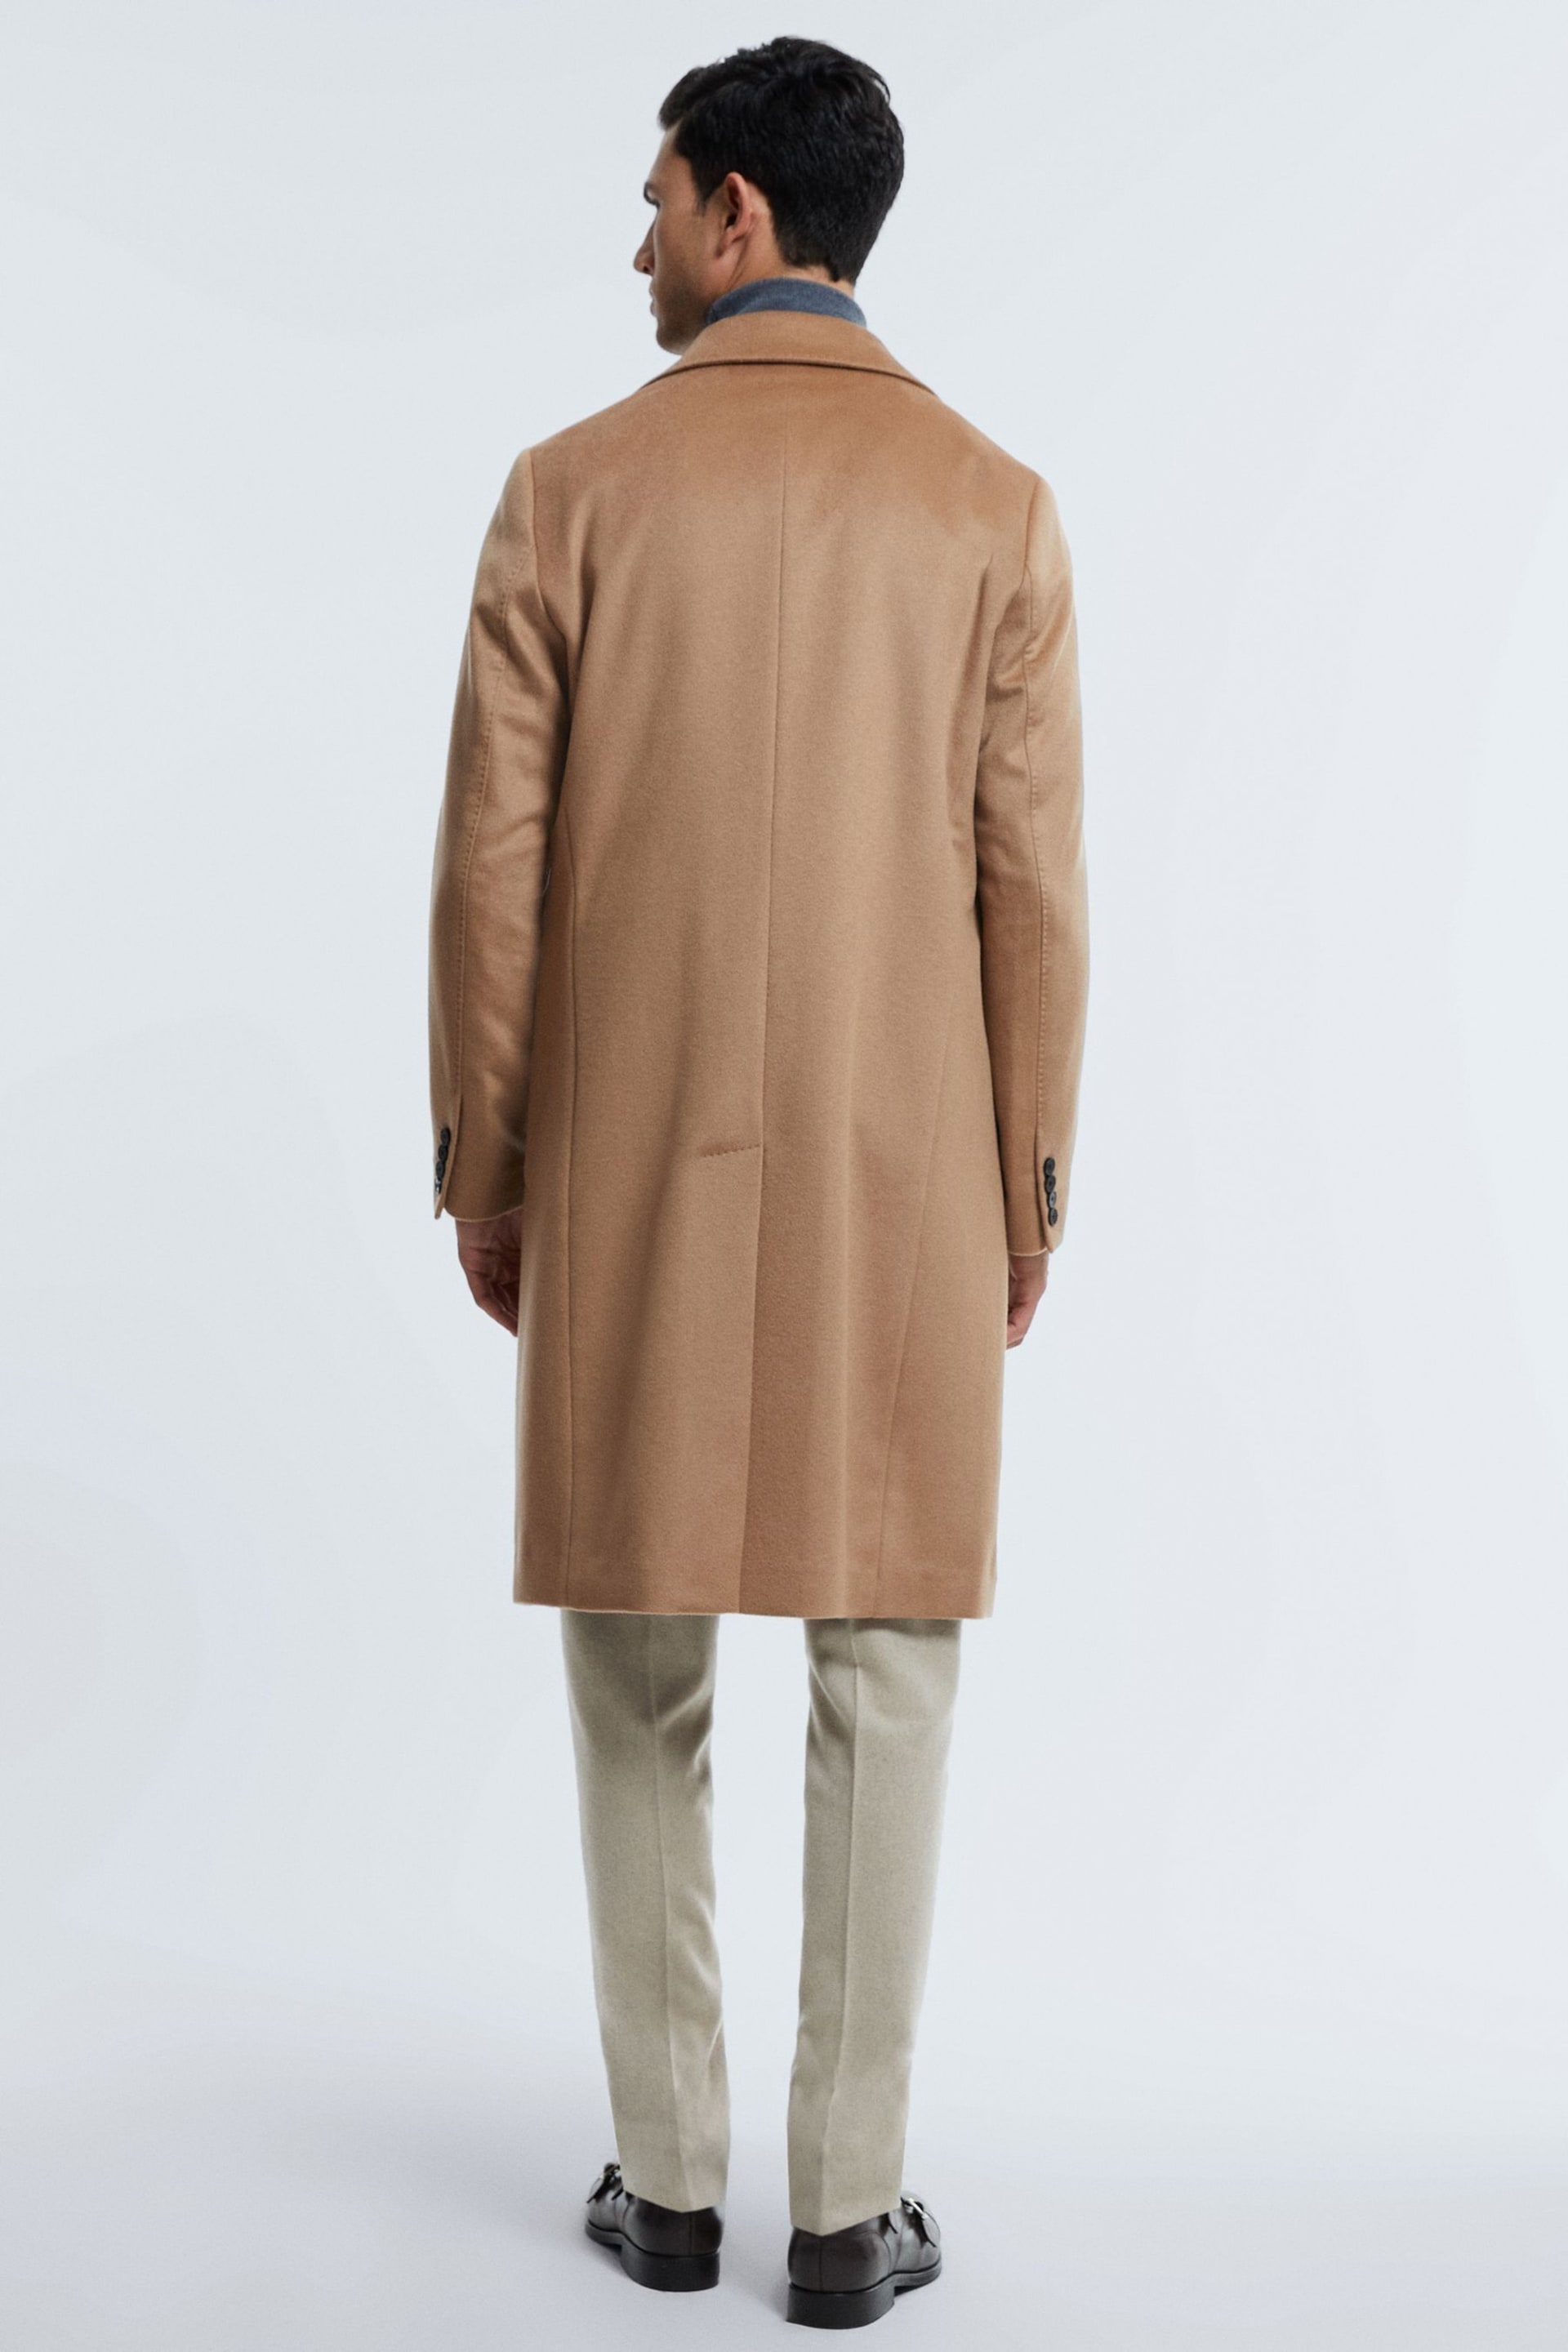 Reiss Camel Tycho Atelier Cashmere Single Breasted Coat - Image 5 of 7